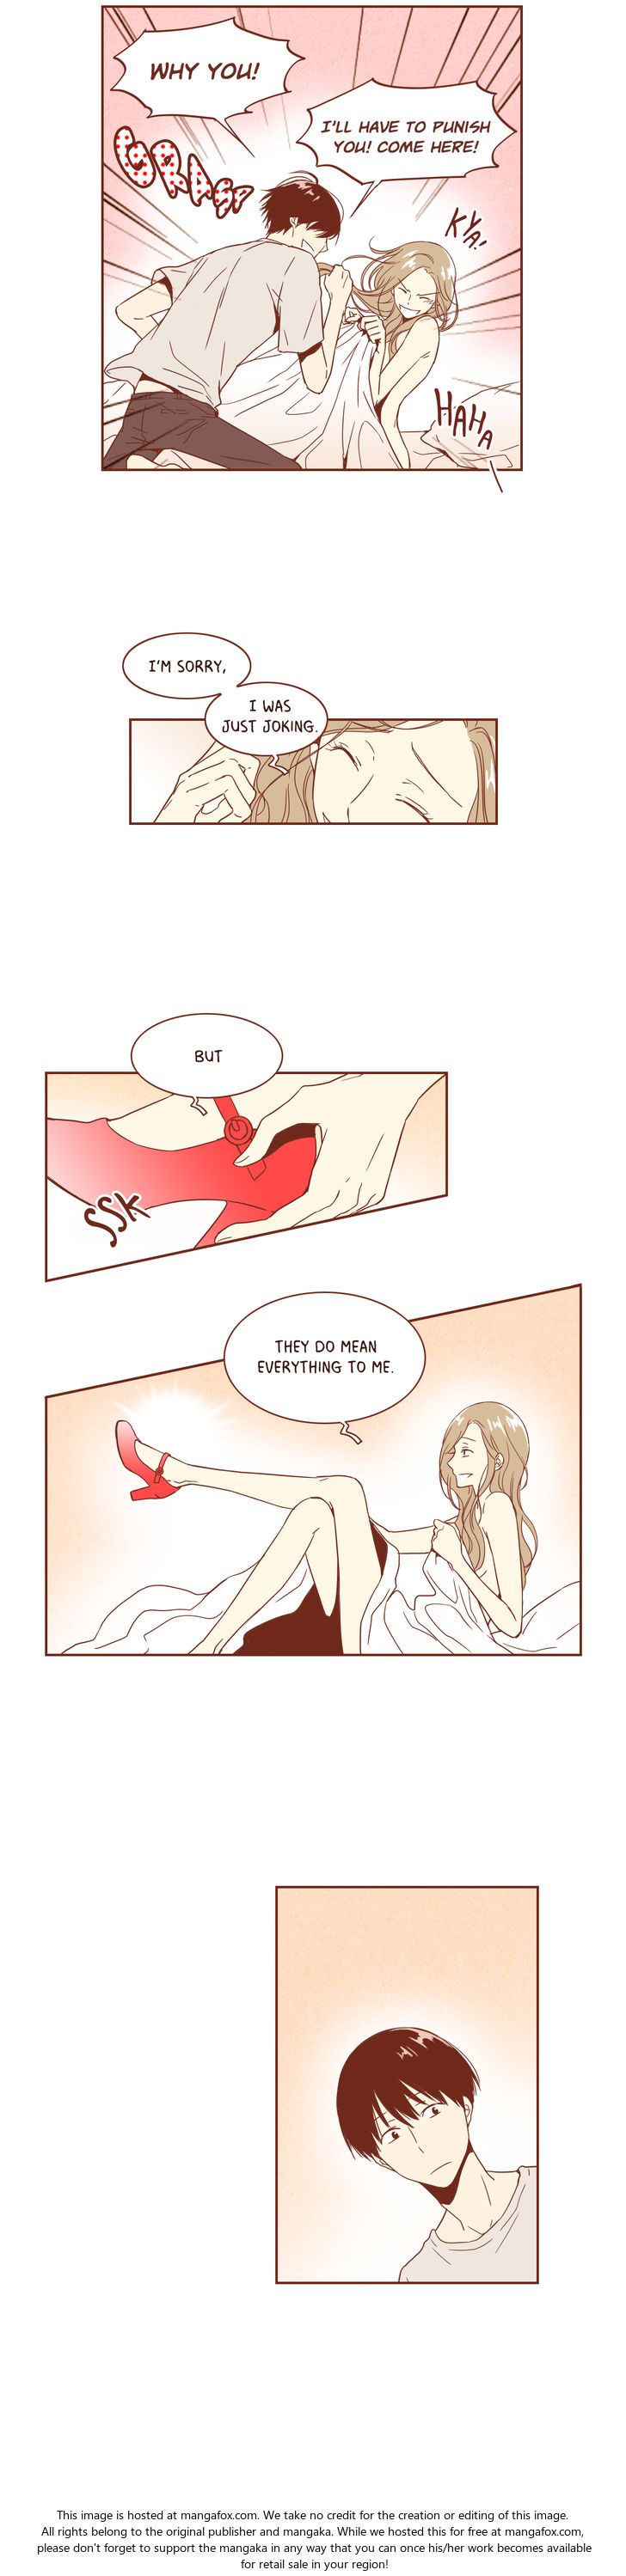 Why Did Men Stop Wearing High Heels? Chapter 003 page 7